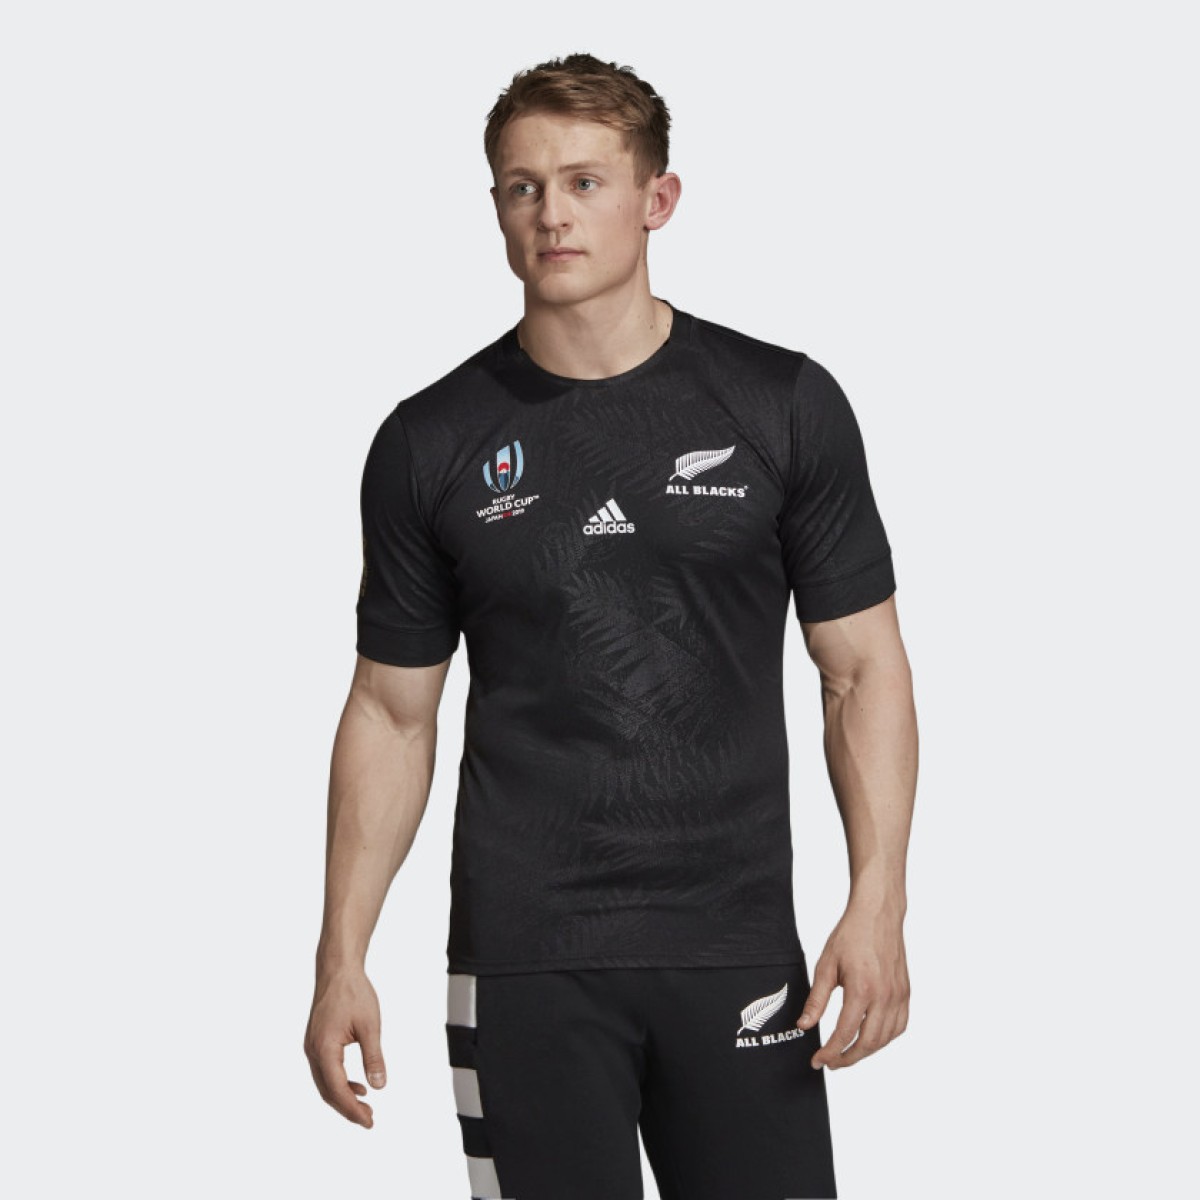 Buy > new zealand world cup jersey > in stock